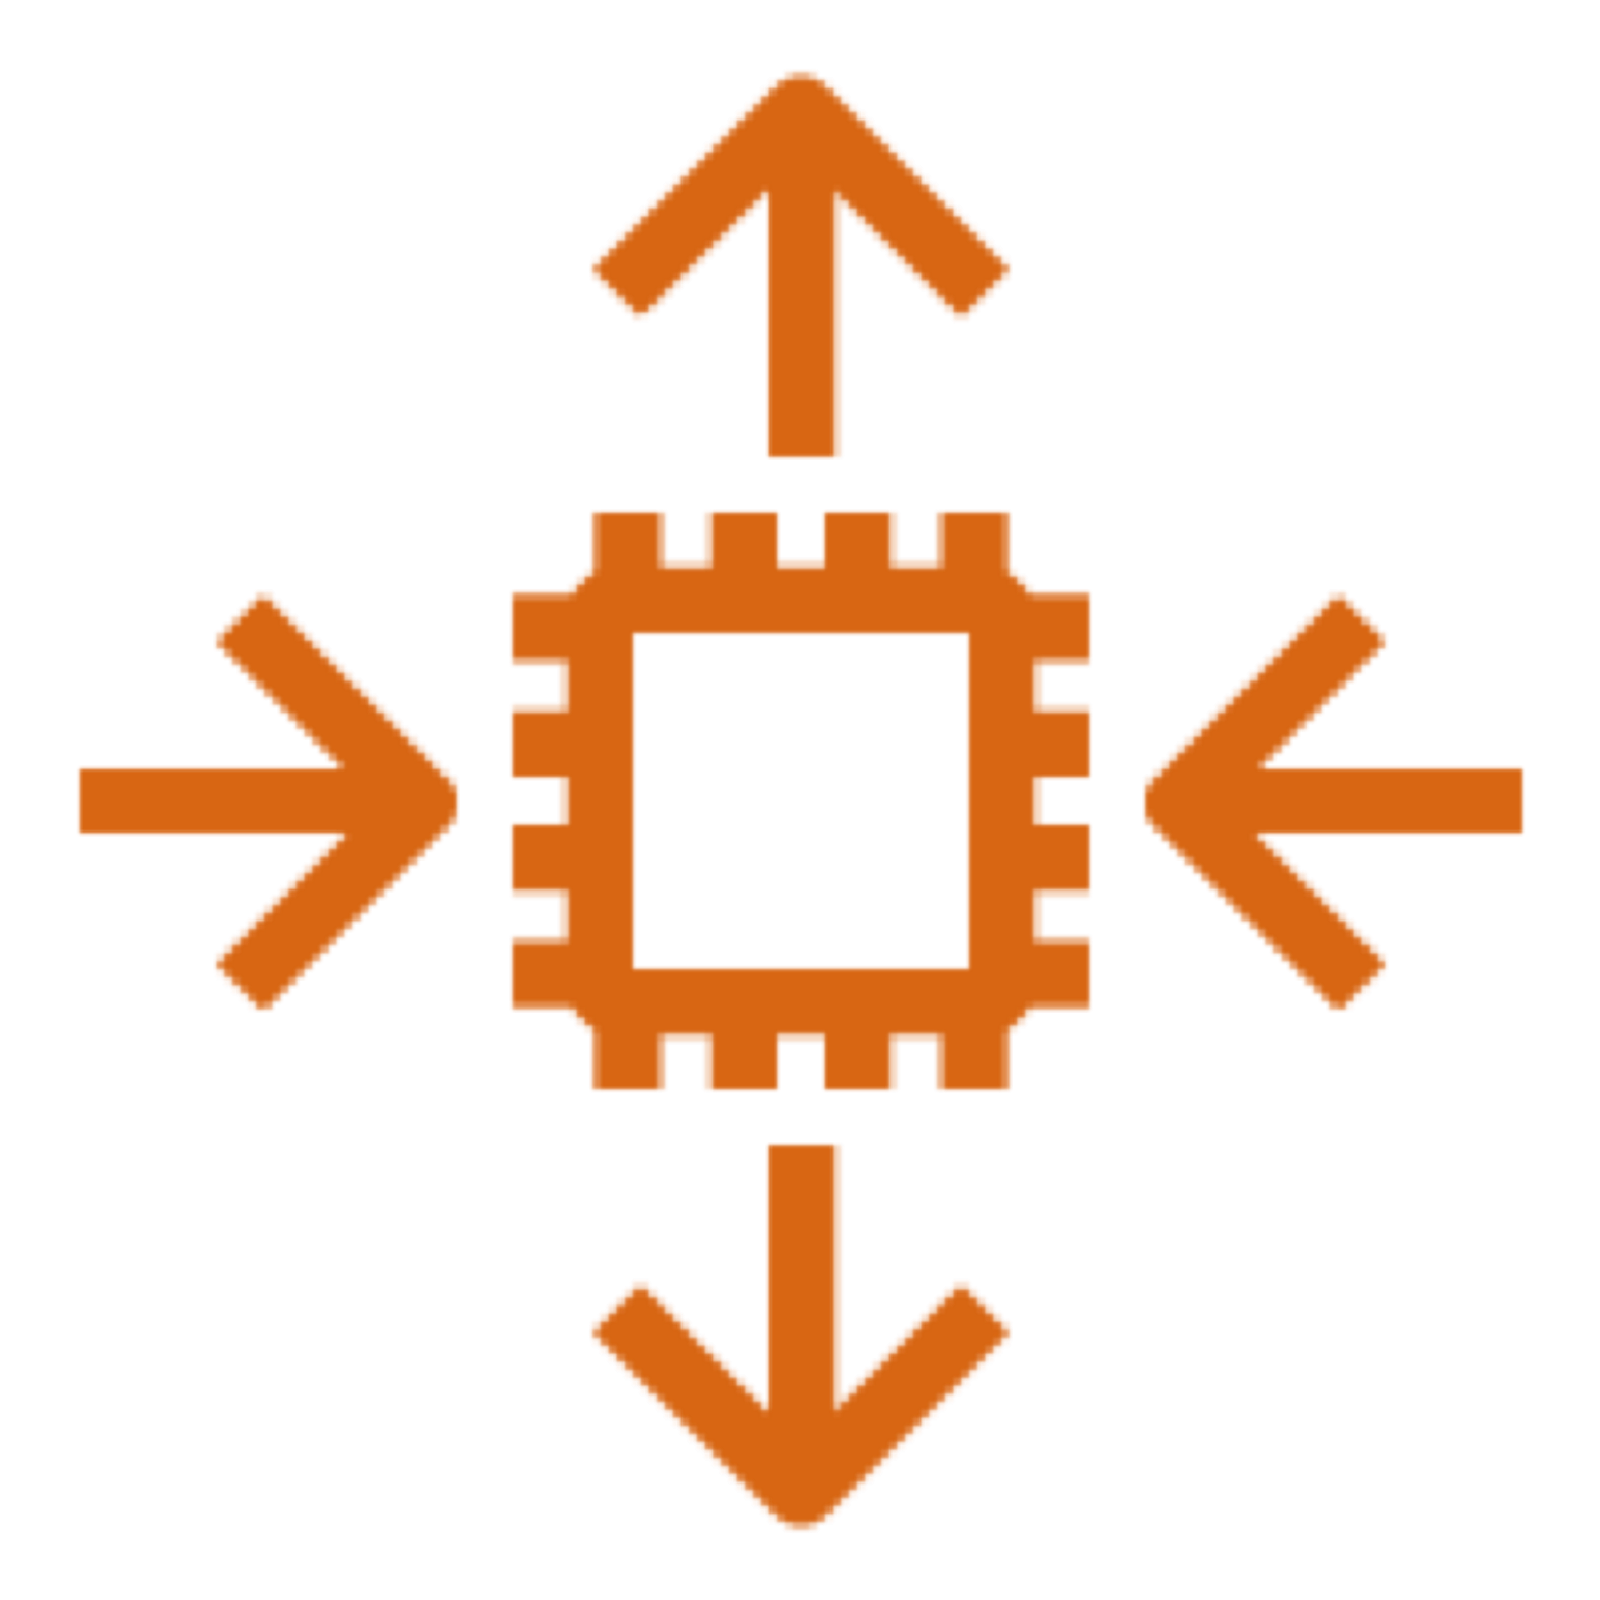 Amazon EC2 Auto Scaling icon depicting a computer chip with horizontal arrows pointing toward it and vertical arrows pointing away from it, representing the ability to scale in or out